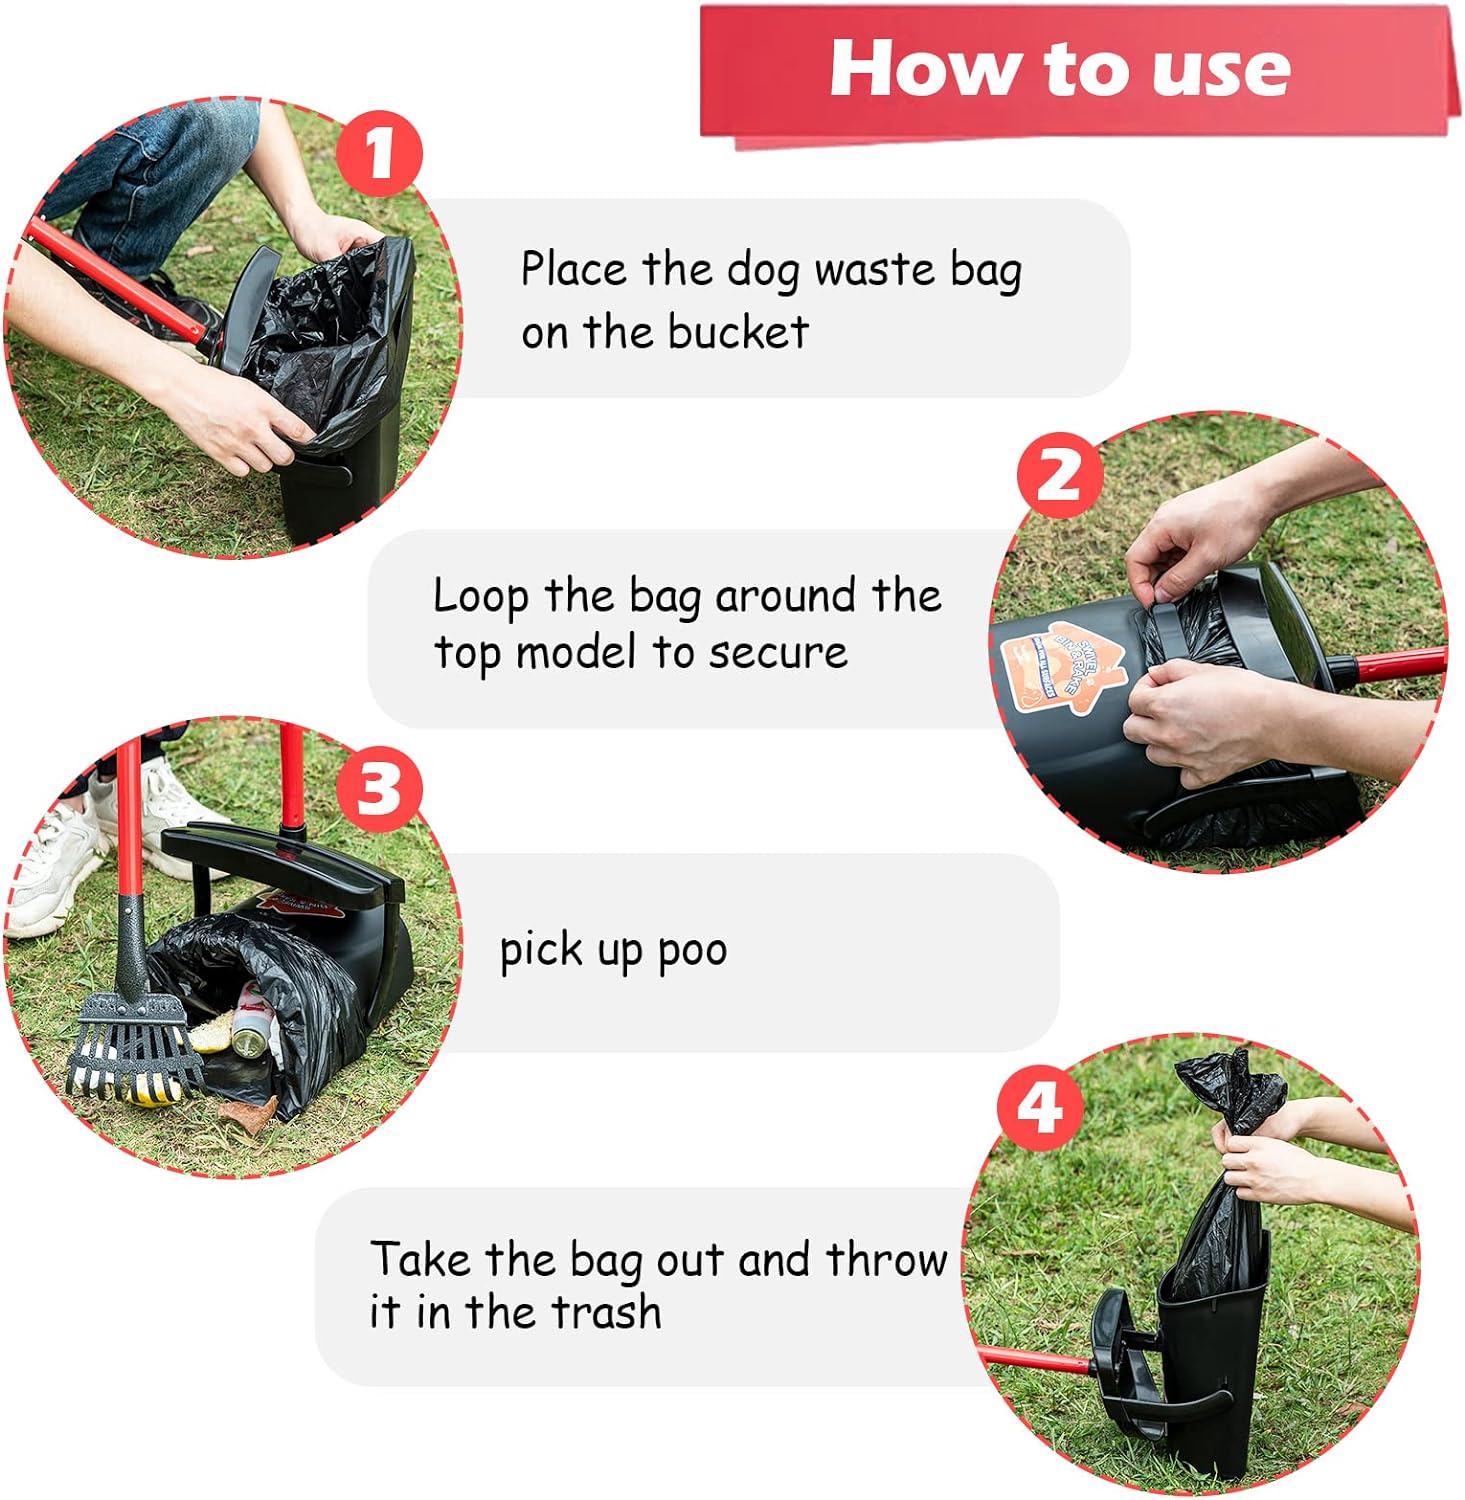 Wholesale prices with free shipping all over United States HUZSV Pooper Scooper Large Swivel Bin & Rake for Large & Small Dogs Non-Breakable Dog Poop Scooper with 20 Waste Bags Easy to Clean Pet Waste Use on Grass, Dirt or Gravel - Pet Supplies - Steven Deals